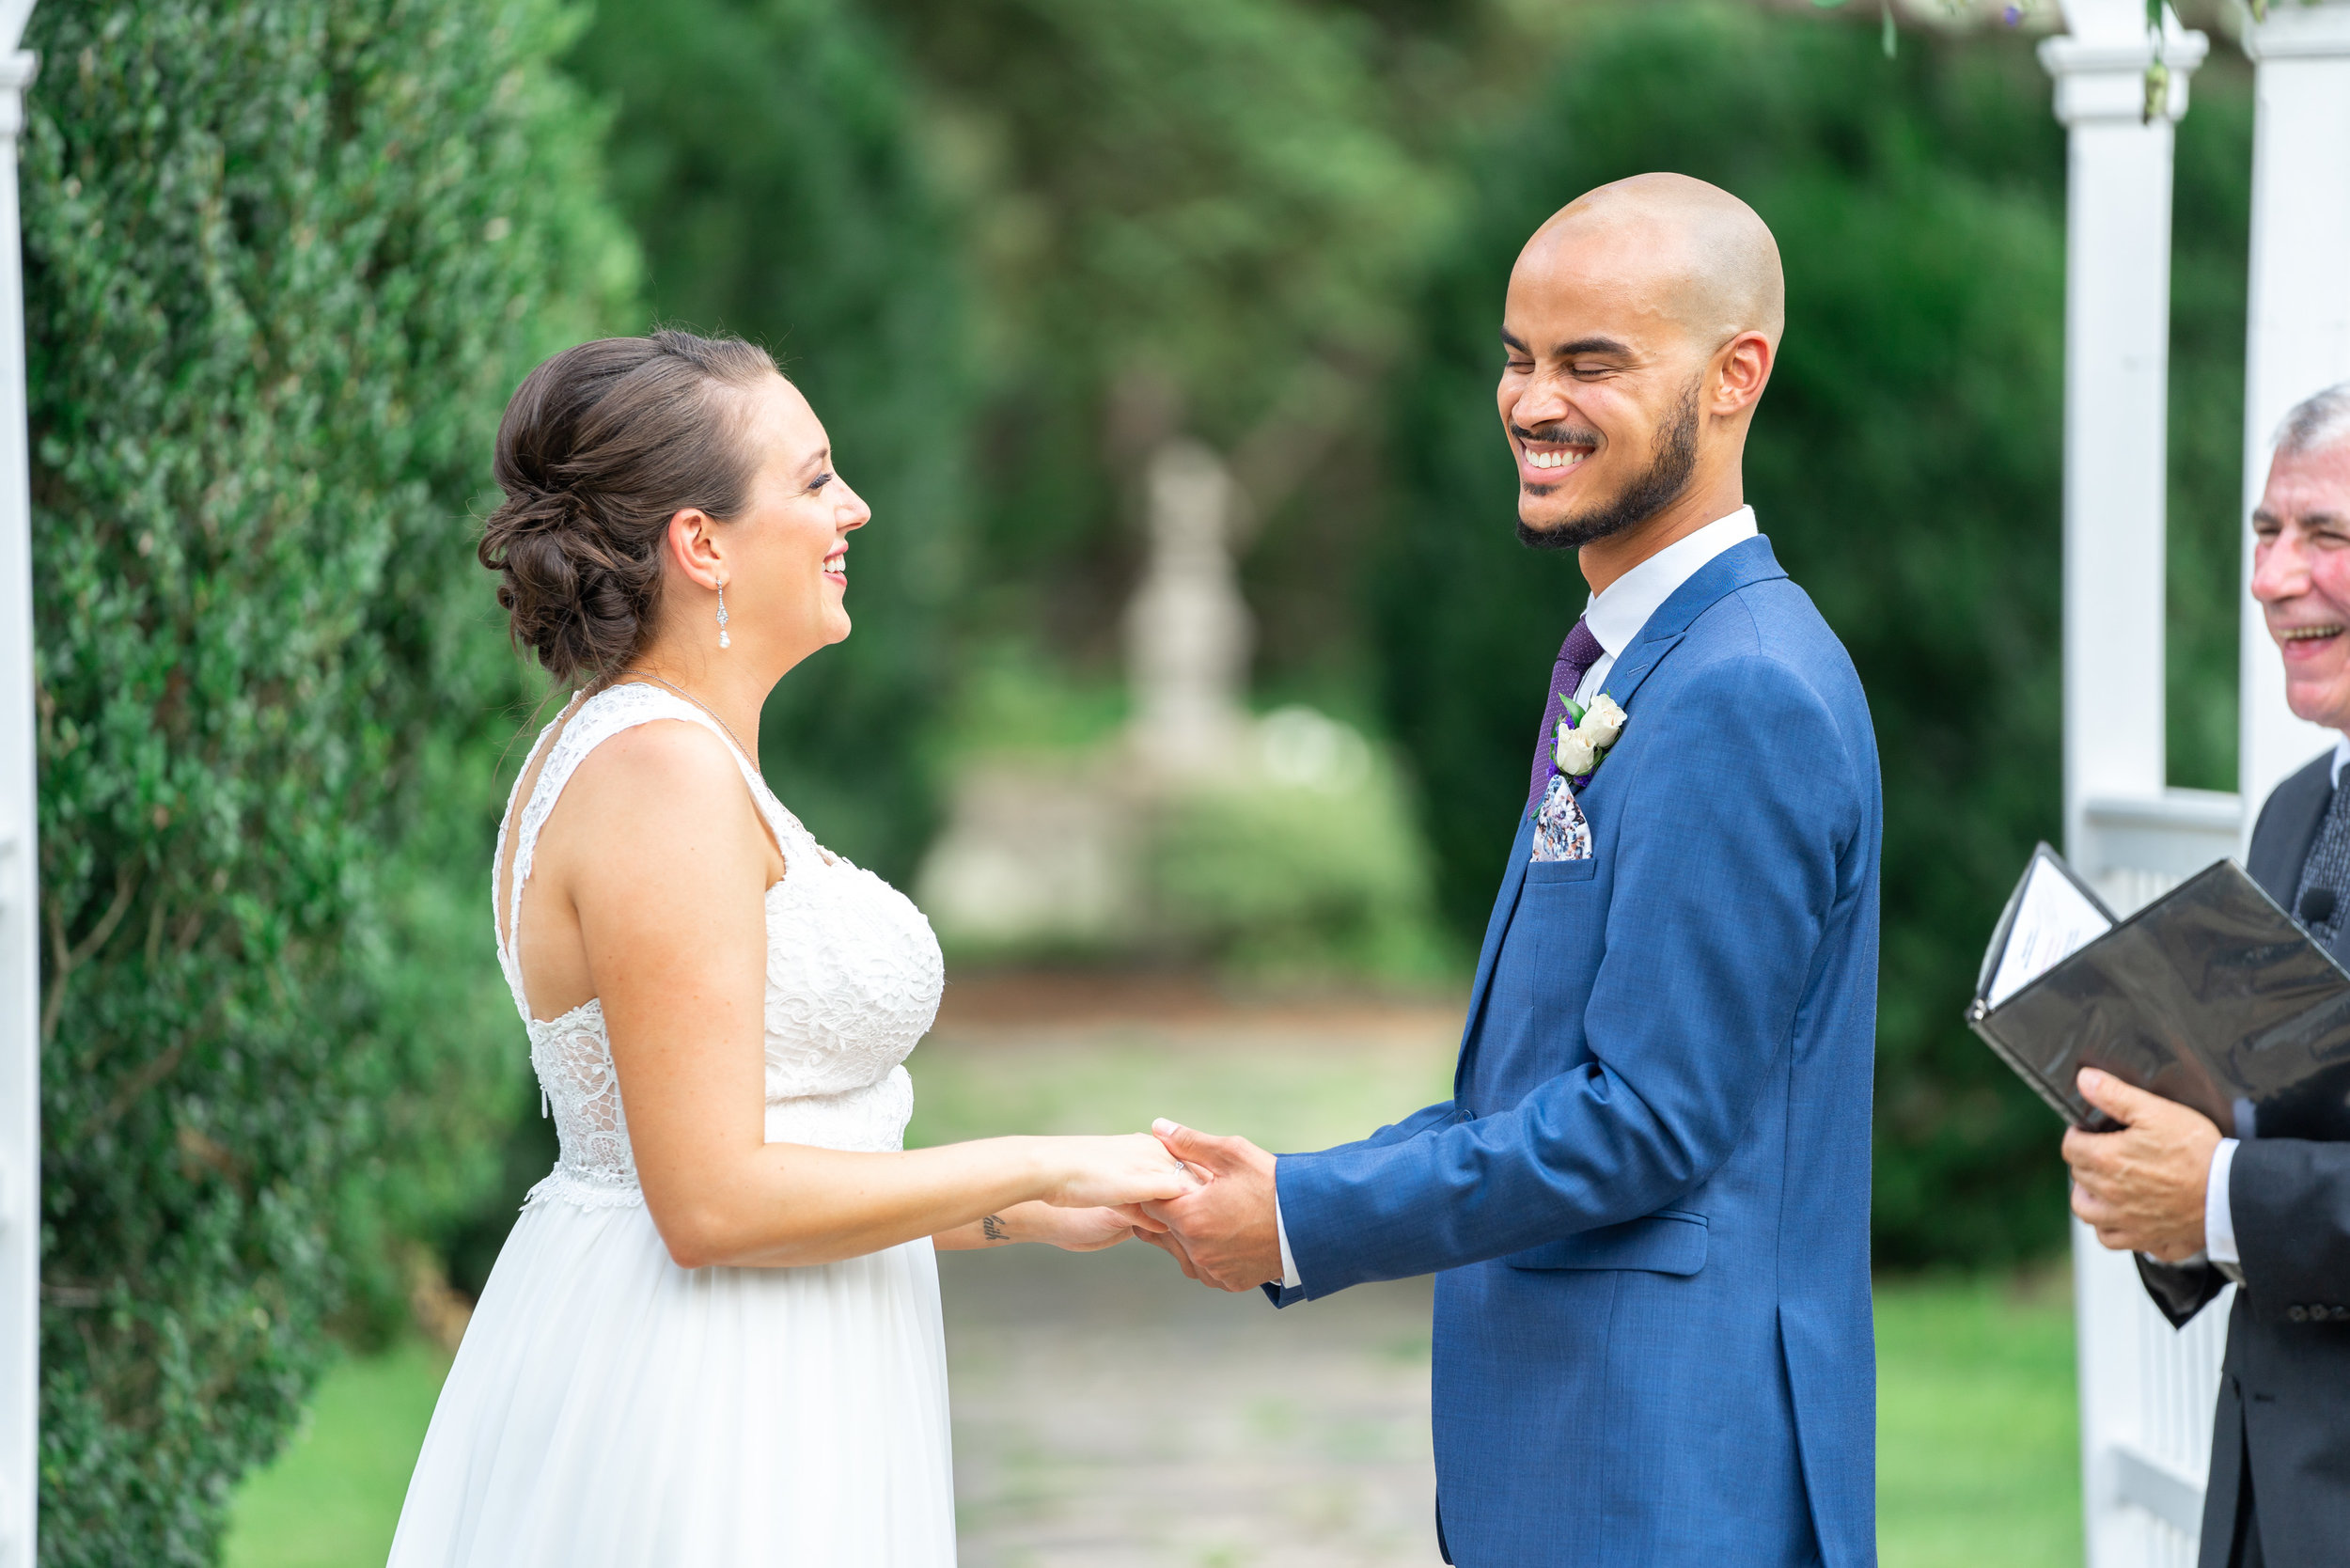 Leesburg wedding ceremony at Rust Manor House in the summer